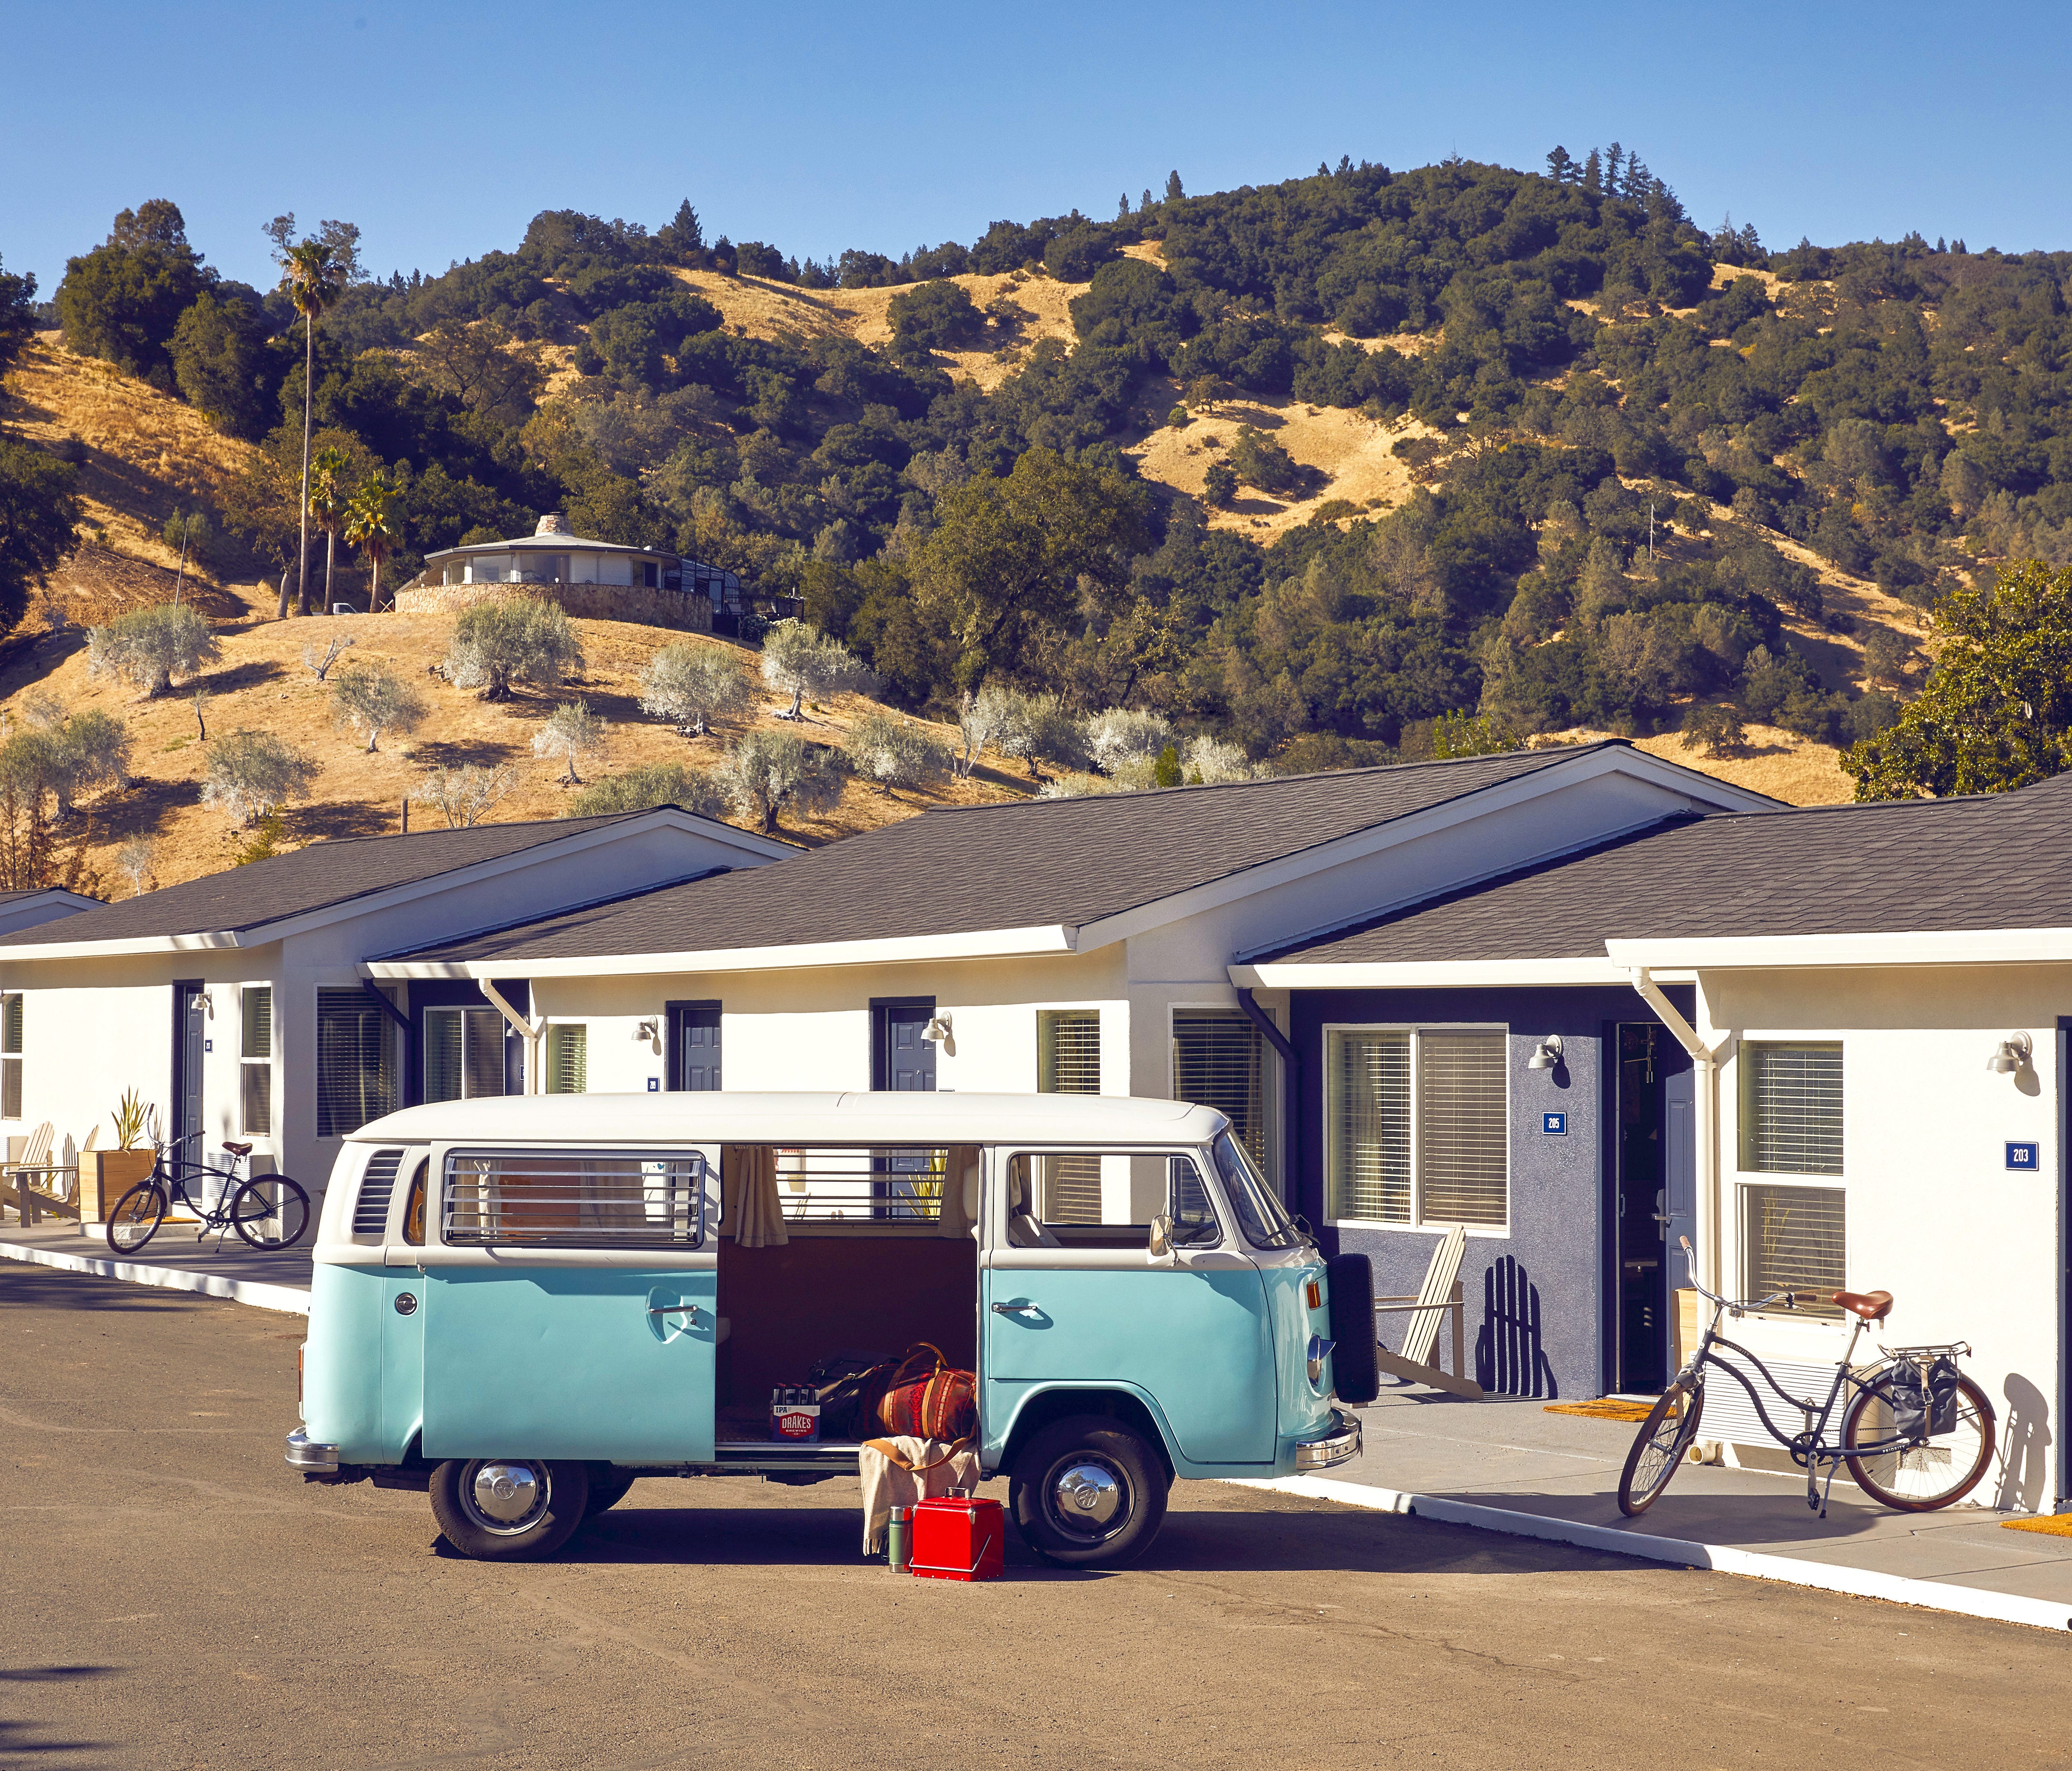 At the renovated Calistoga Motor Lodge and Spa, rooms are designed to mimic a 1960s VW camper.